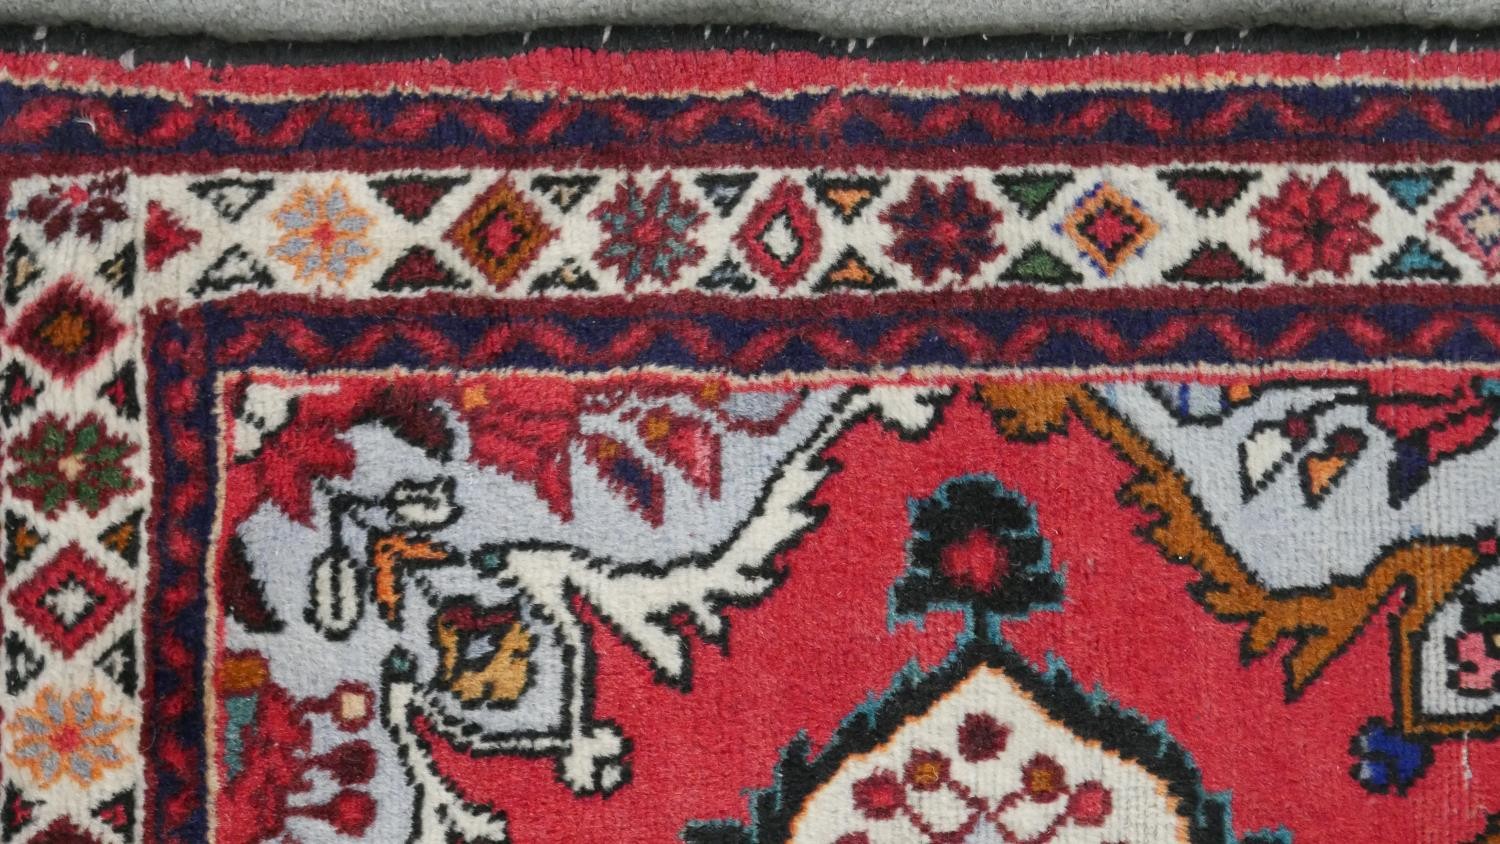 A handmade Persian Hamadan rug with repeating floral motifs across the madder ground within - Image 4 of 7